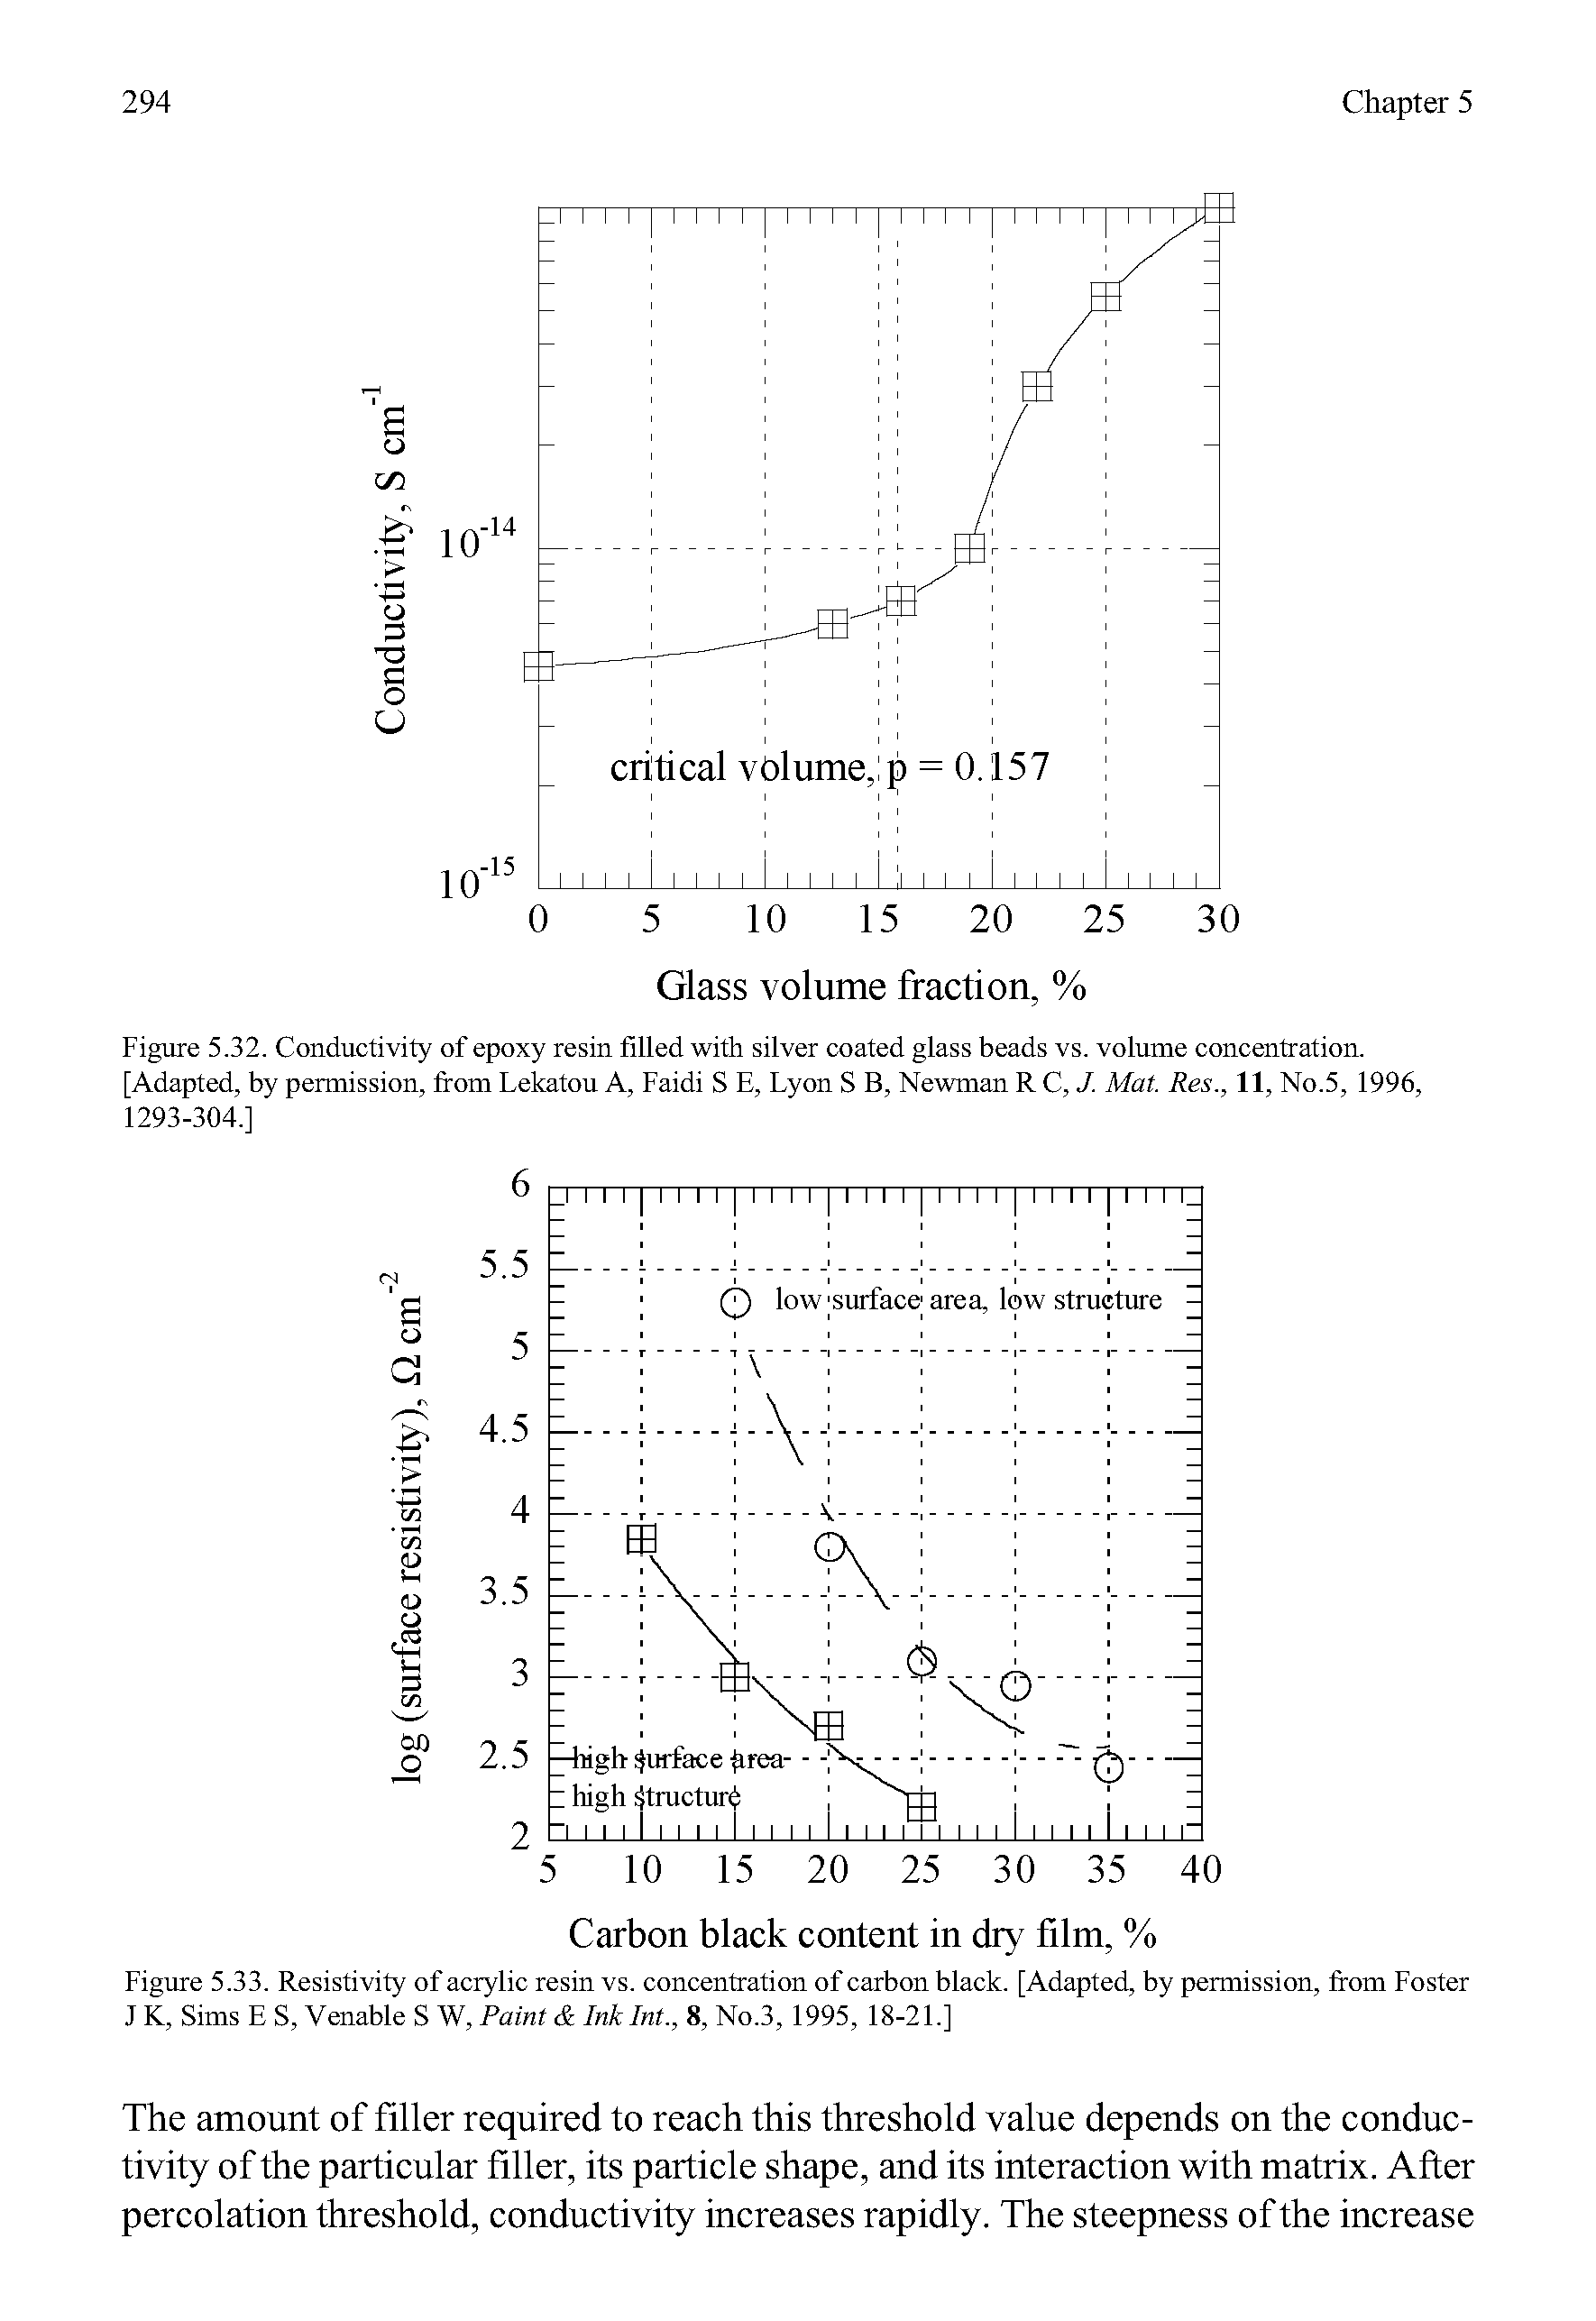 Figure 5.32. Conductivity of epoxy resin filled with silver coated glass beads vs. volume concentration. [Adapted, by permission, from Lekatou A, Faidi S E, Lyon S B, Newman R C, J. Mat. Res., 11, No.5, 1996, 1293-304.1...